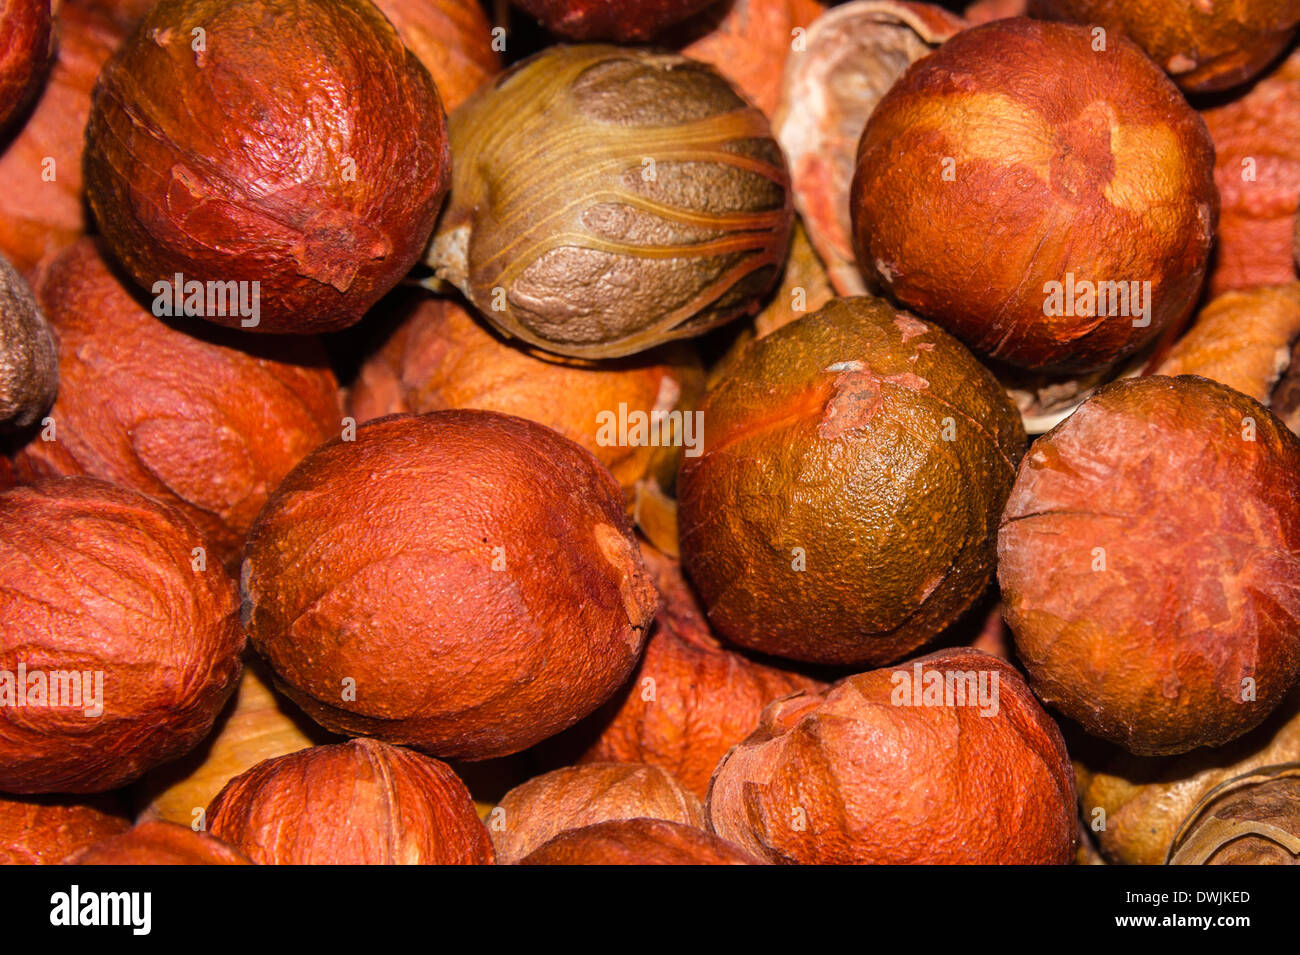 Fresh nutmegs from the husk Stock Photo